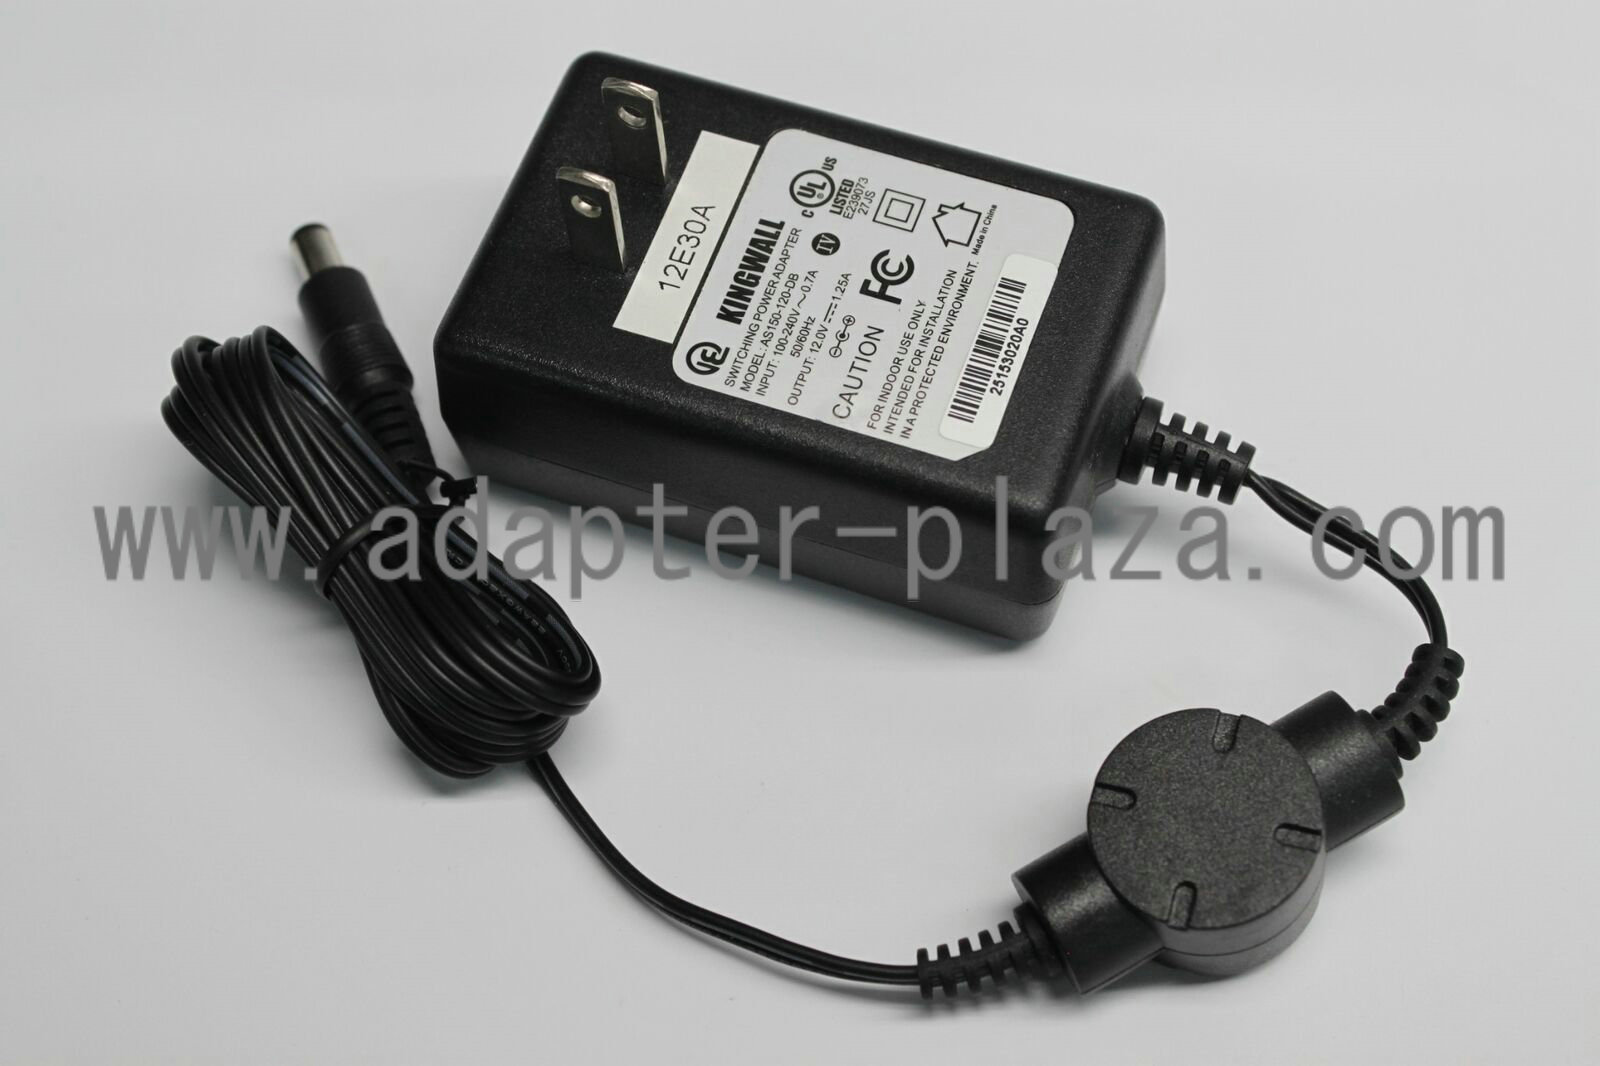 Kingwall AS150-120-DB Switching Power Supply DC 12V 1.25A AC Adapter - Click Image to Close